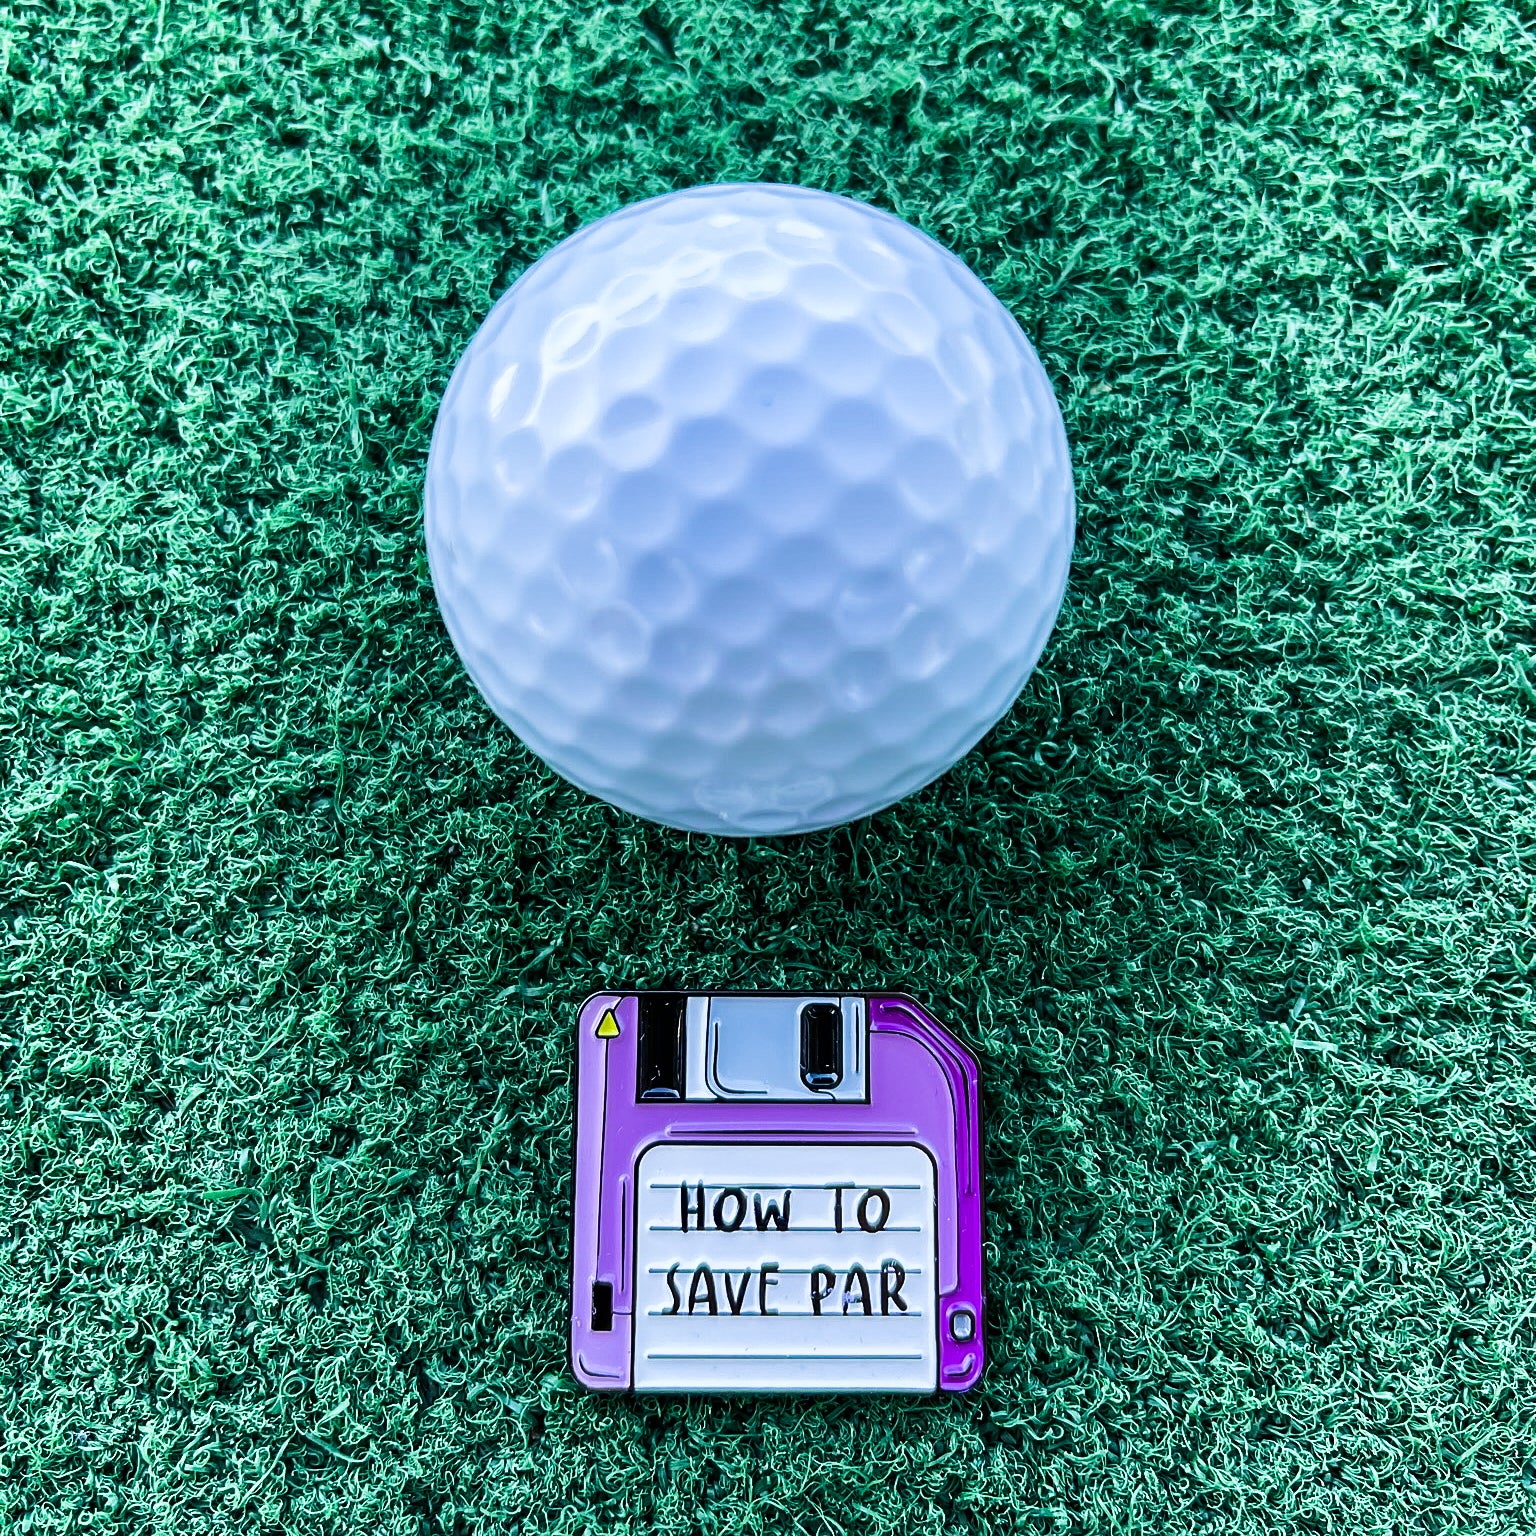 How To Save Par - Ball Marker